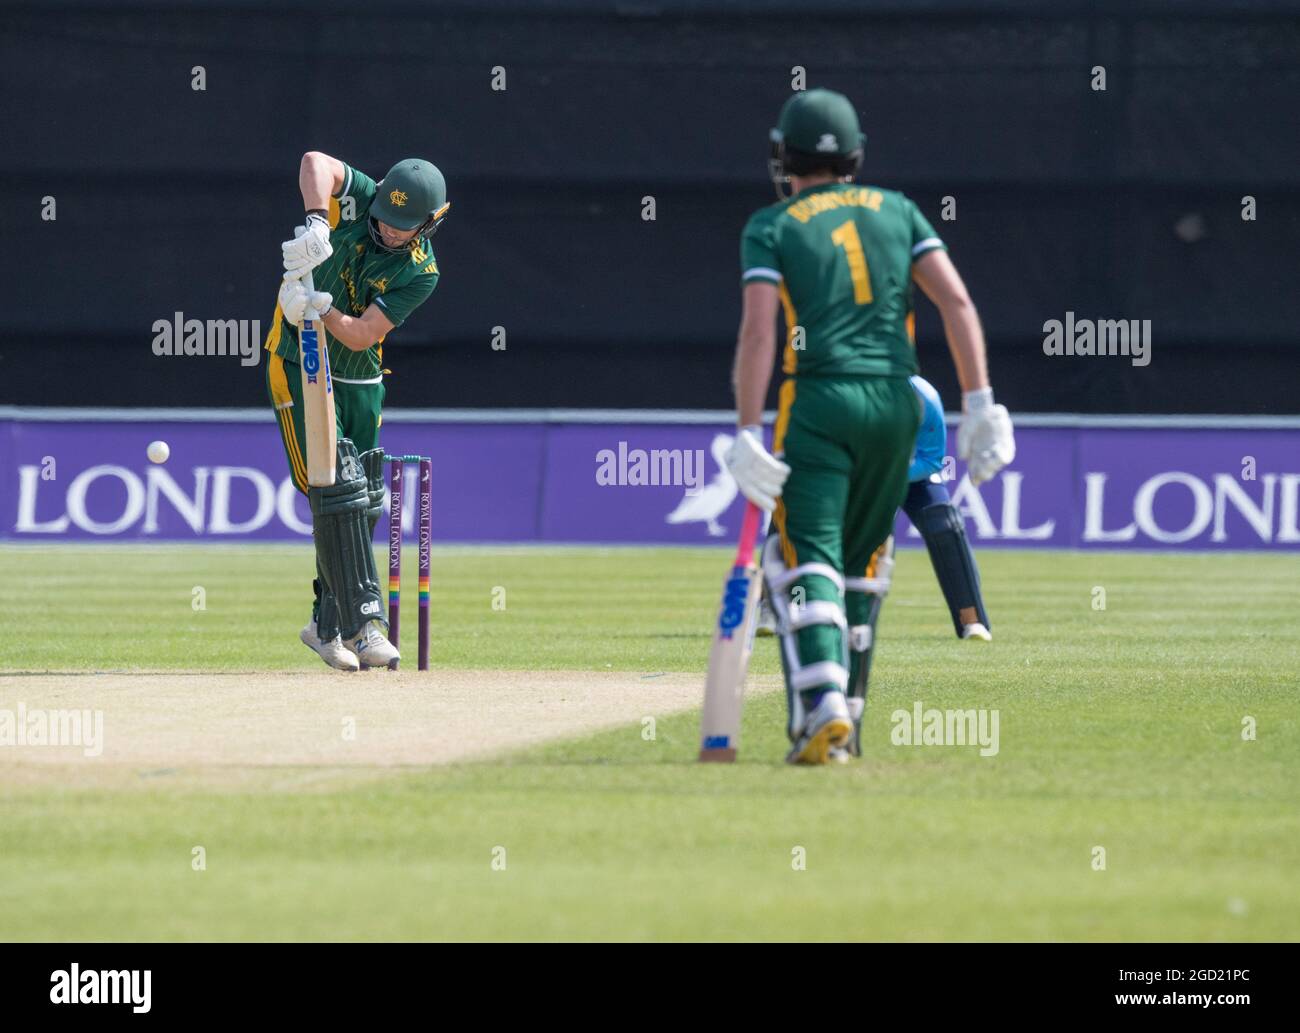 Grantham Cricket ground, Grantham, UK.10th August 2021. Ben Slater batting for Nottinghamshire in the Royal London one day cup with group B Nottinghamshire Outlaws taking on Northamptonshire Steelbacks at the Grantham cricket ground. Credit: Alan Beastall/Alamy Live News. Stock Photo